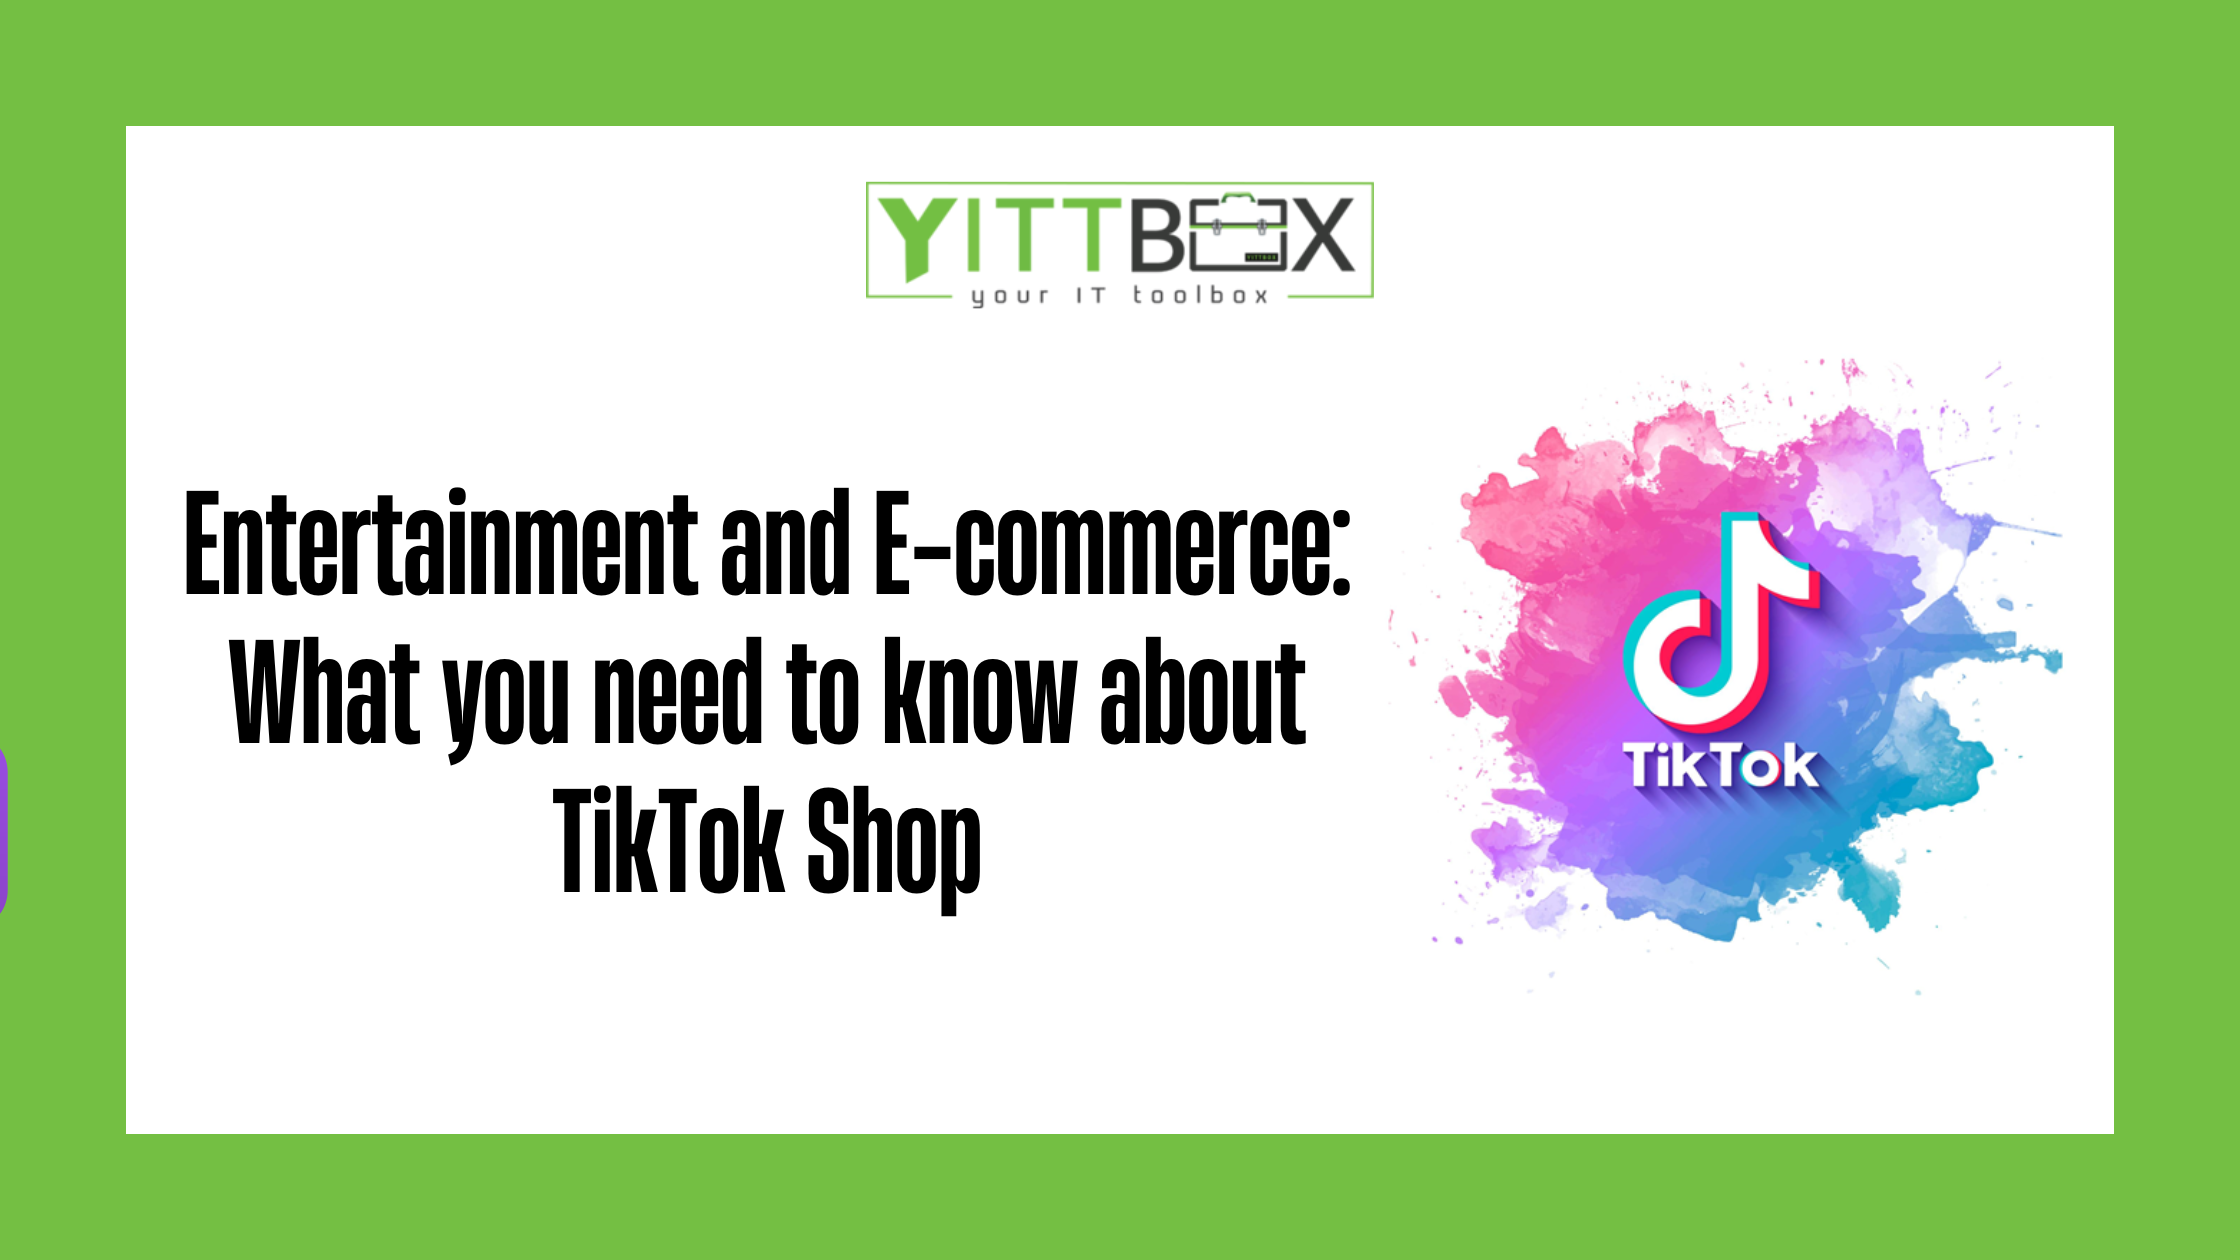 Entertainment and E-commerce: What you need to know about TikTok Shop